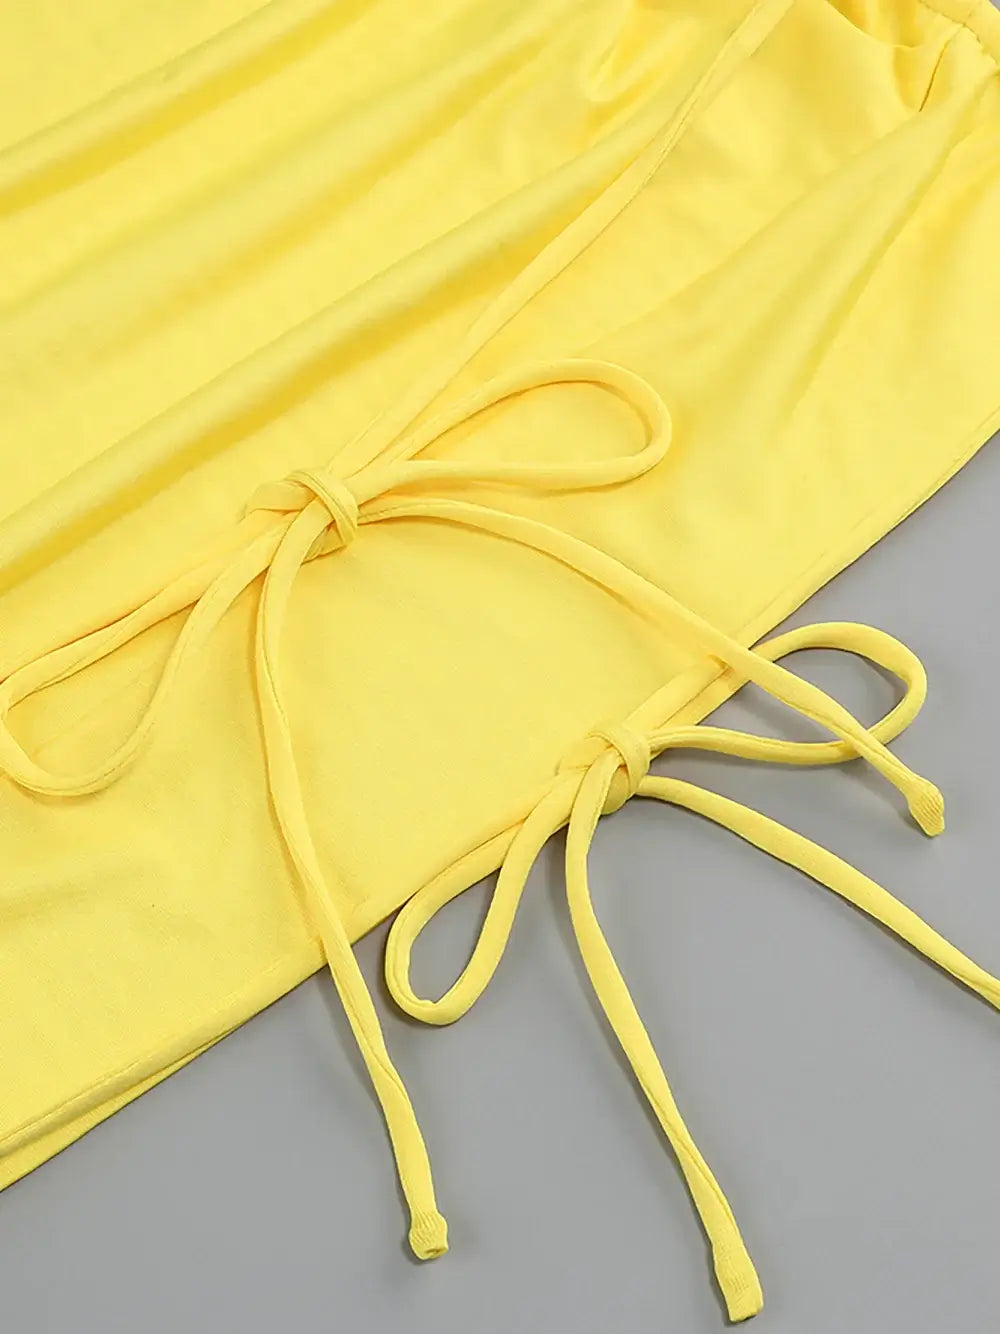 Sunny Yellow Halter Embellished Two-Piece Maxi Dress